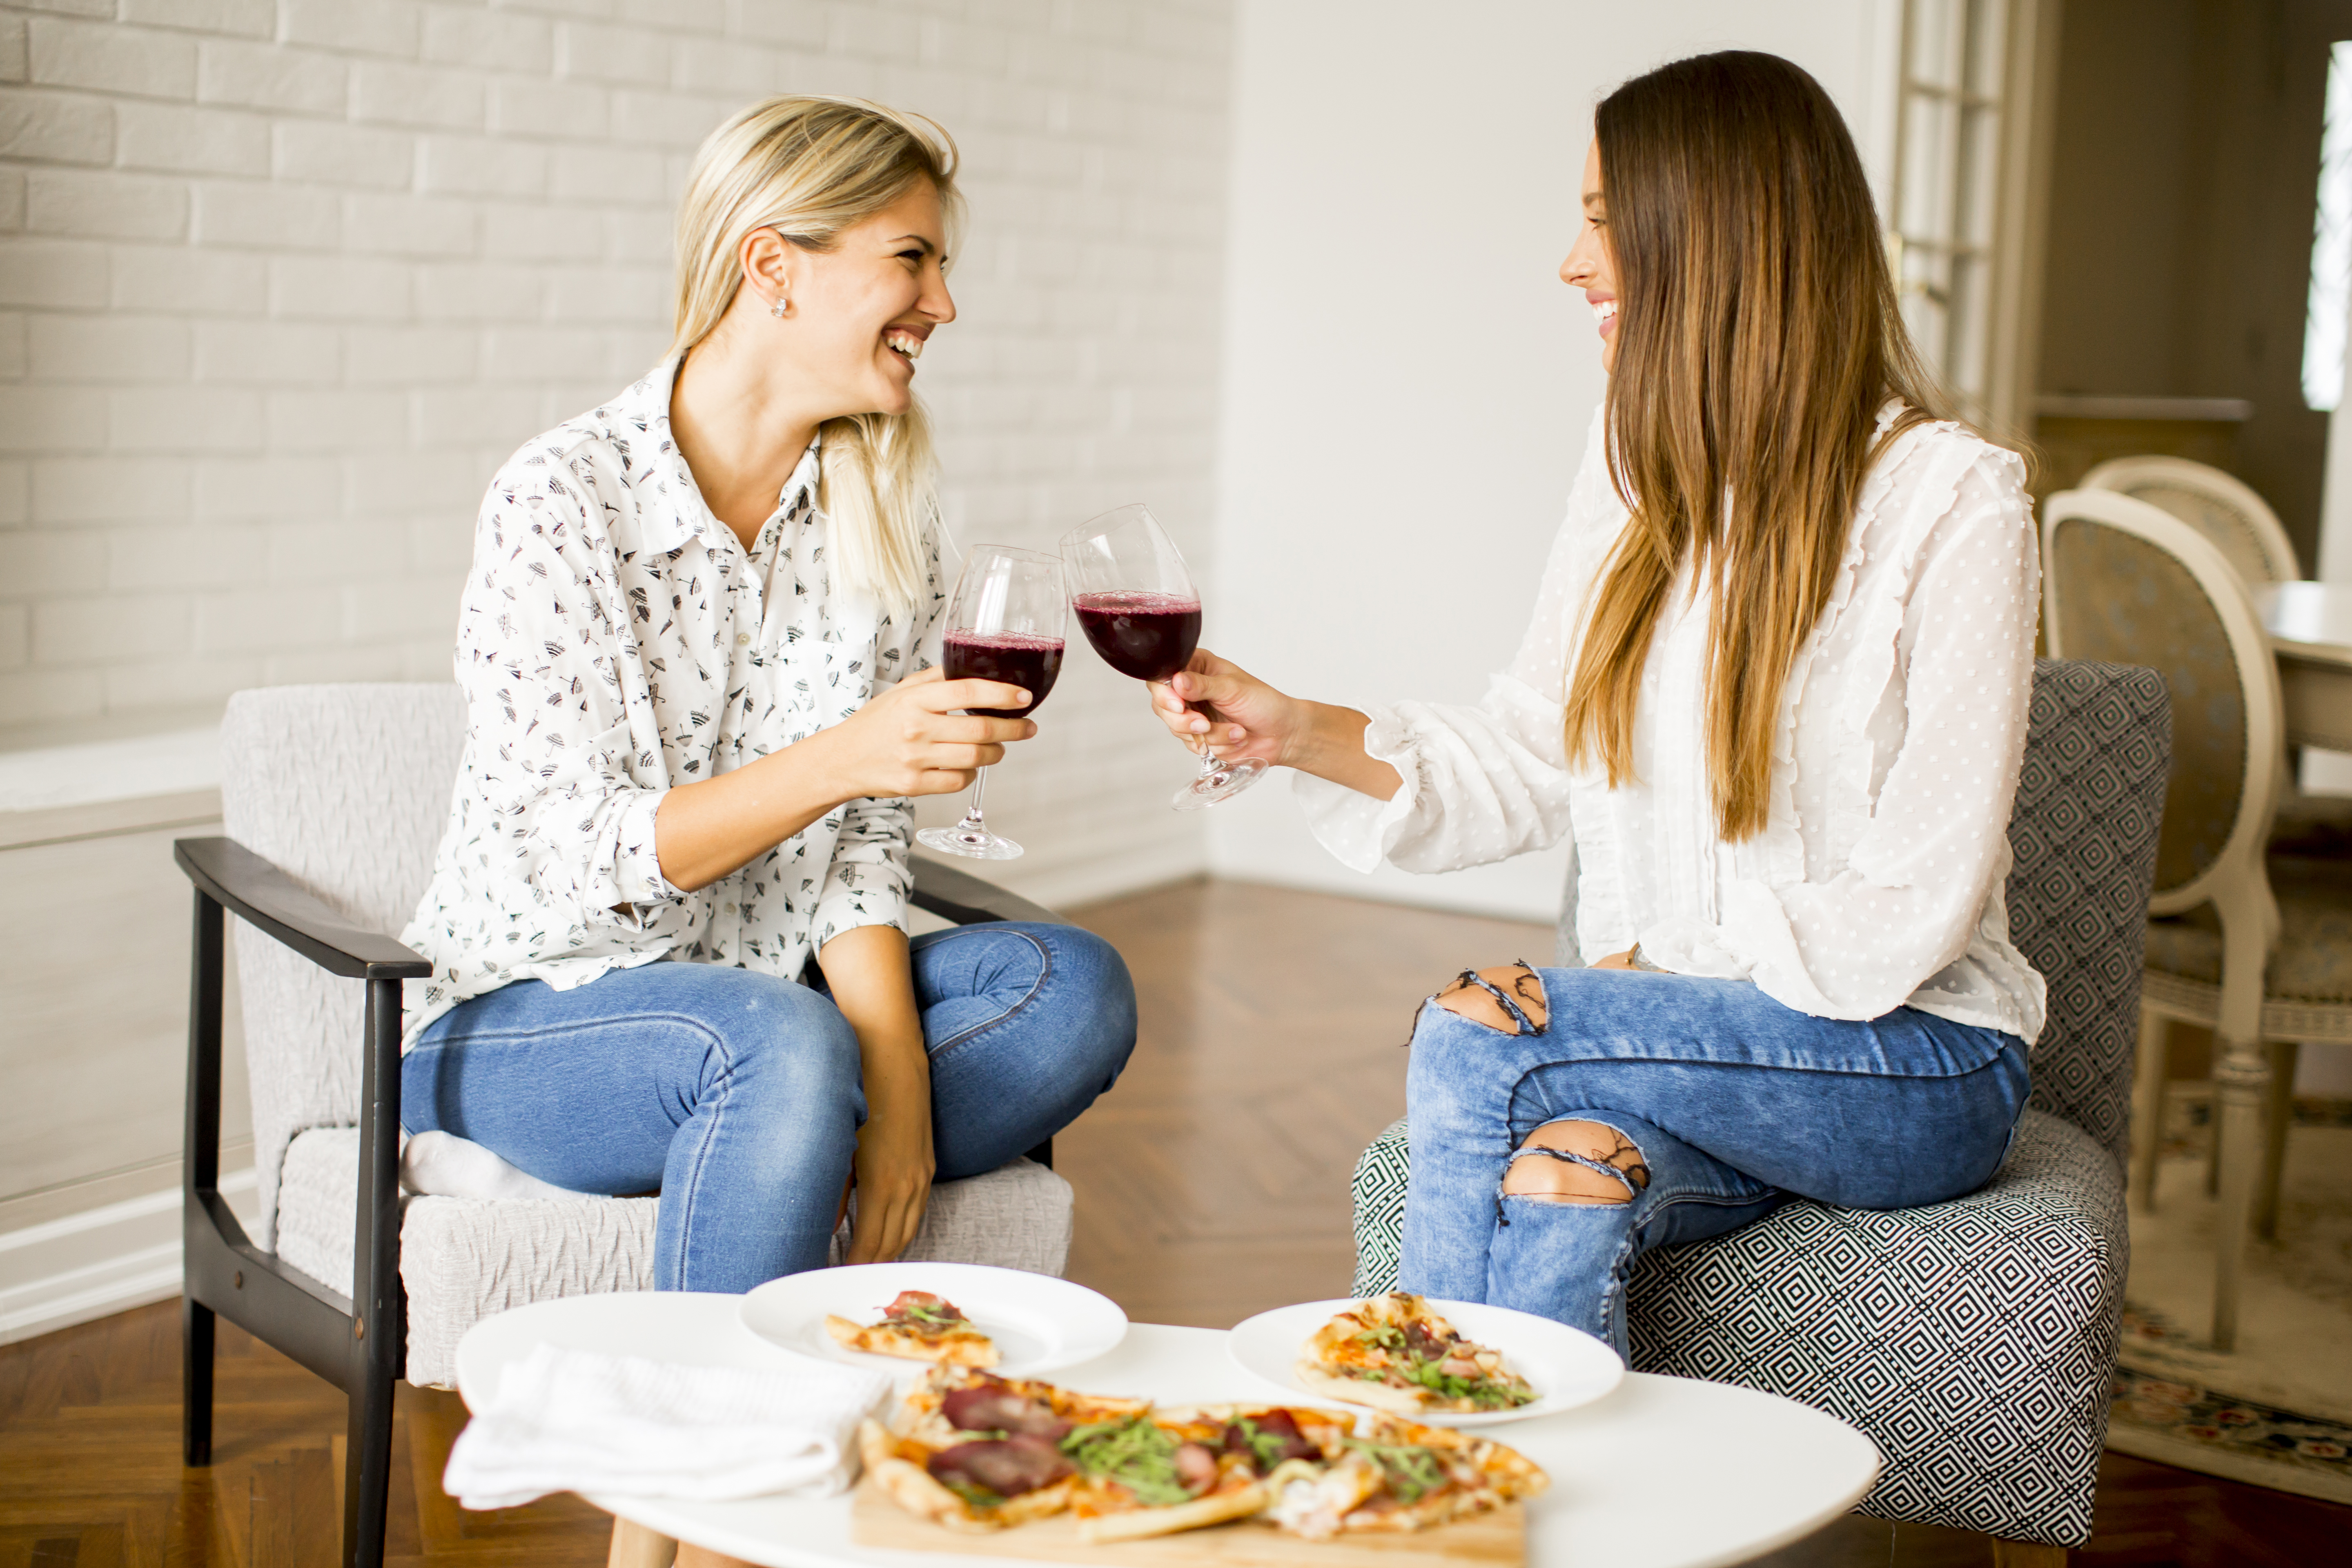 Pretty young women eating pizza and drink red wine | Source: Getty Images